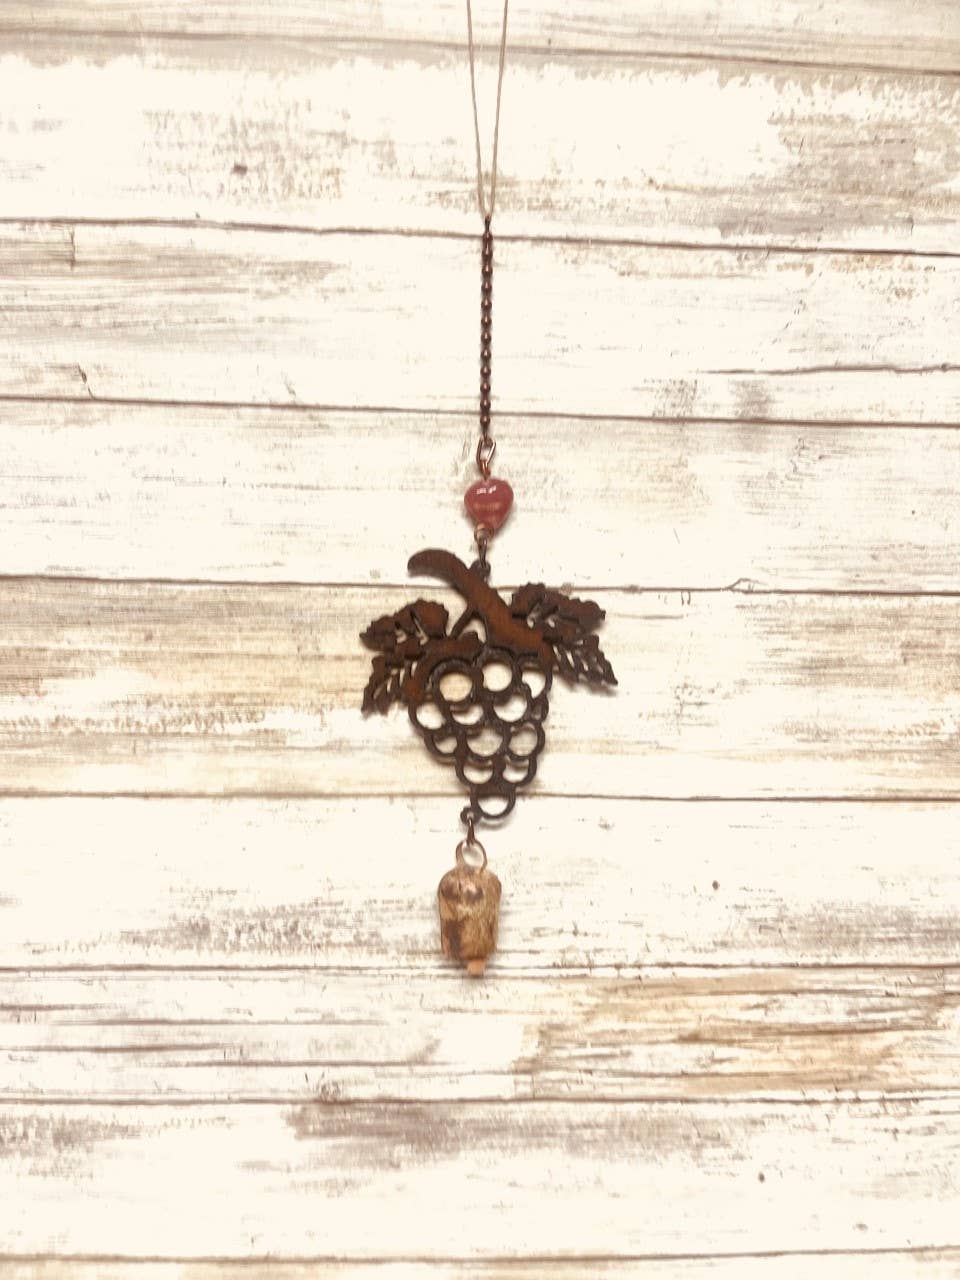 Grapes Bell Rustic Wine Garden Bell Chime Vineyard